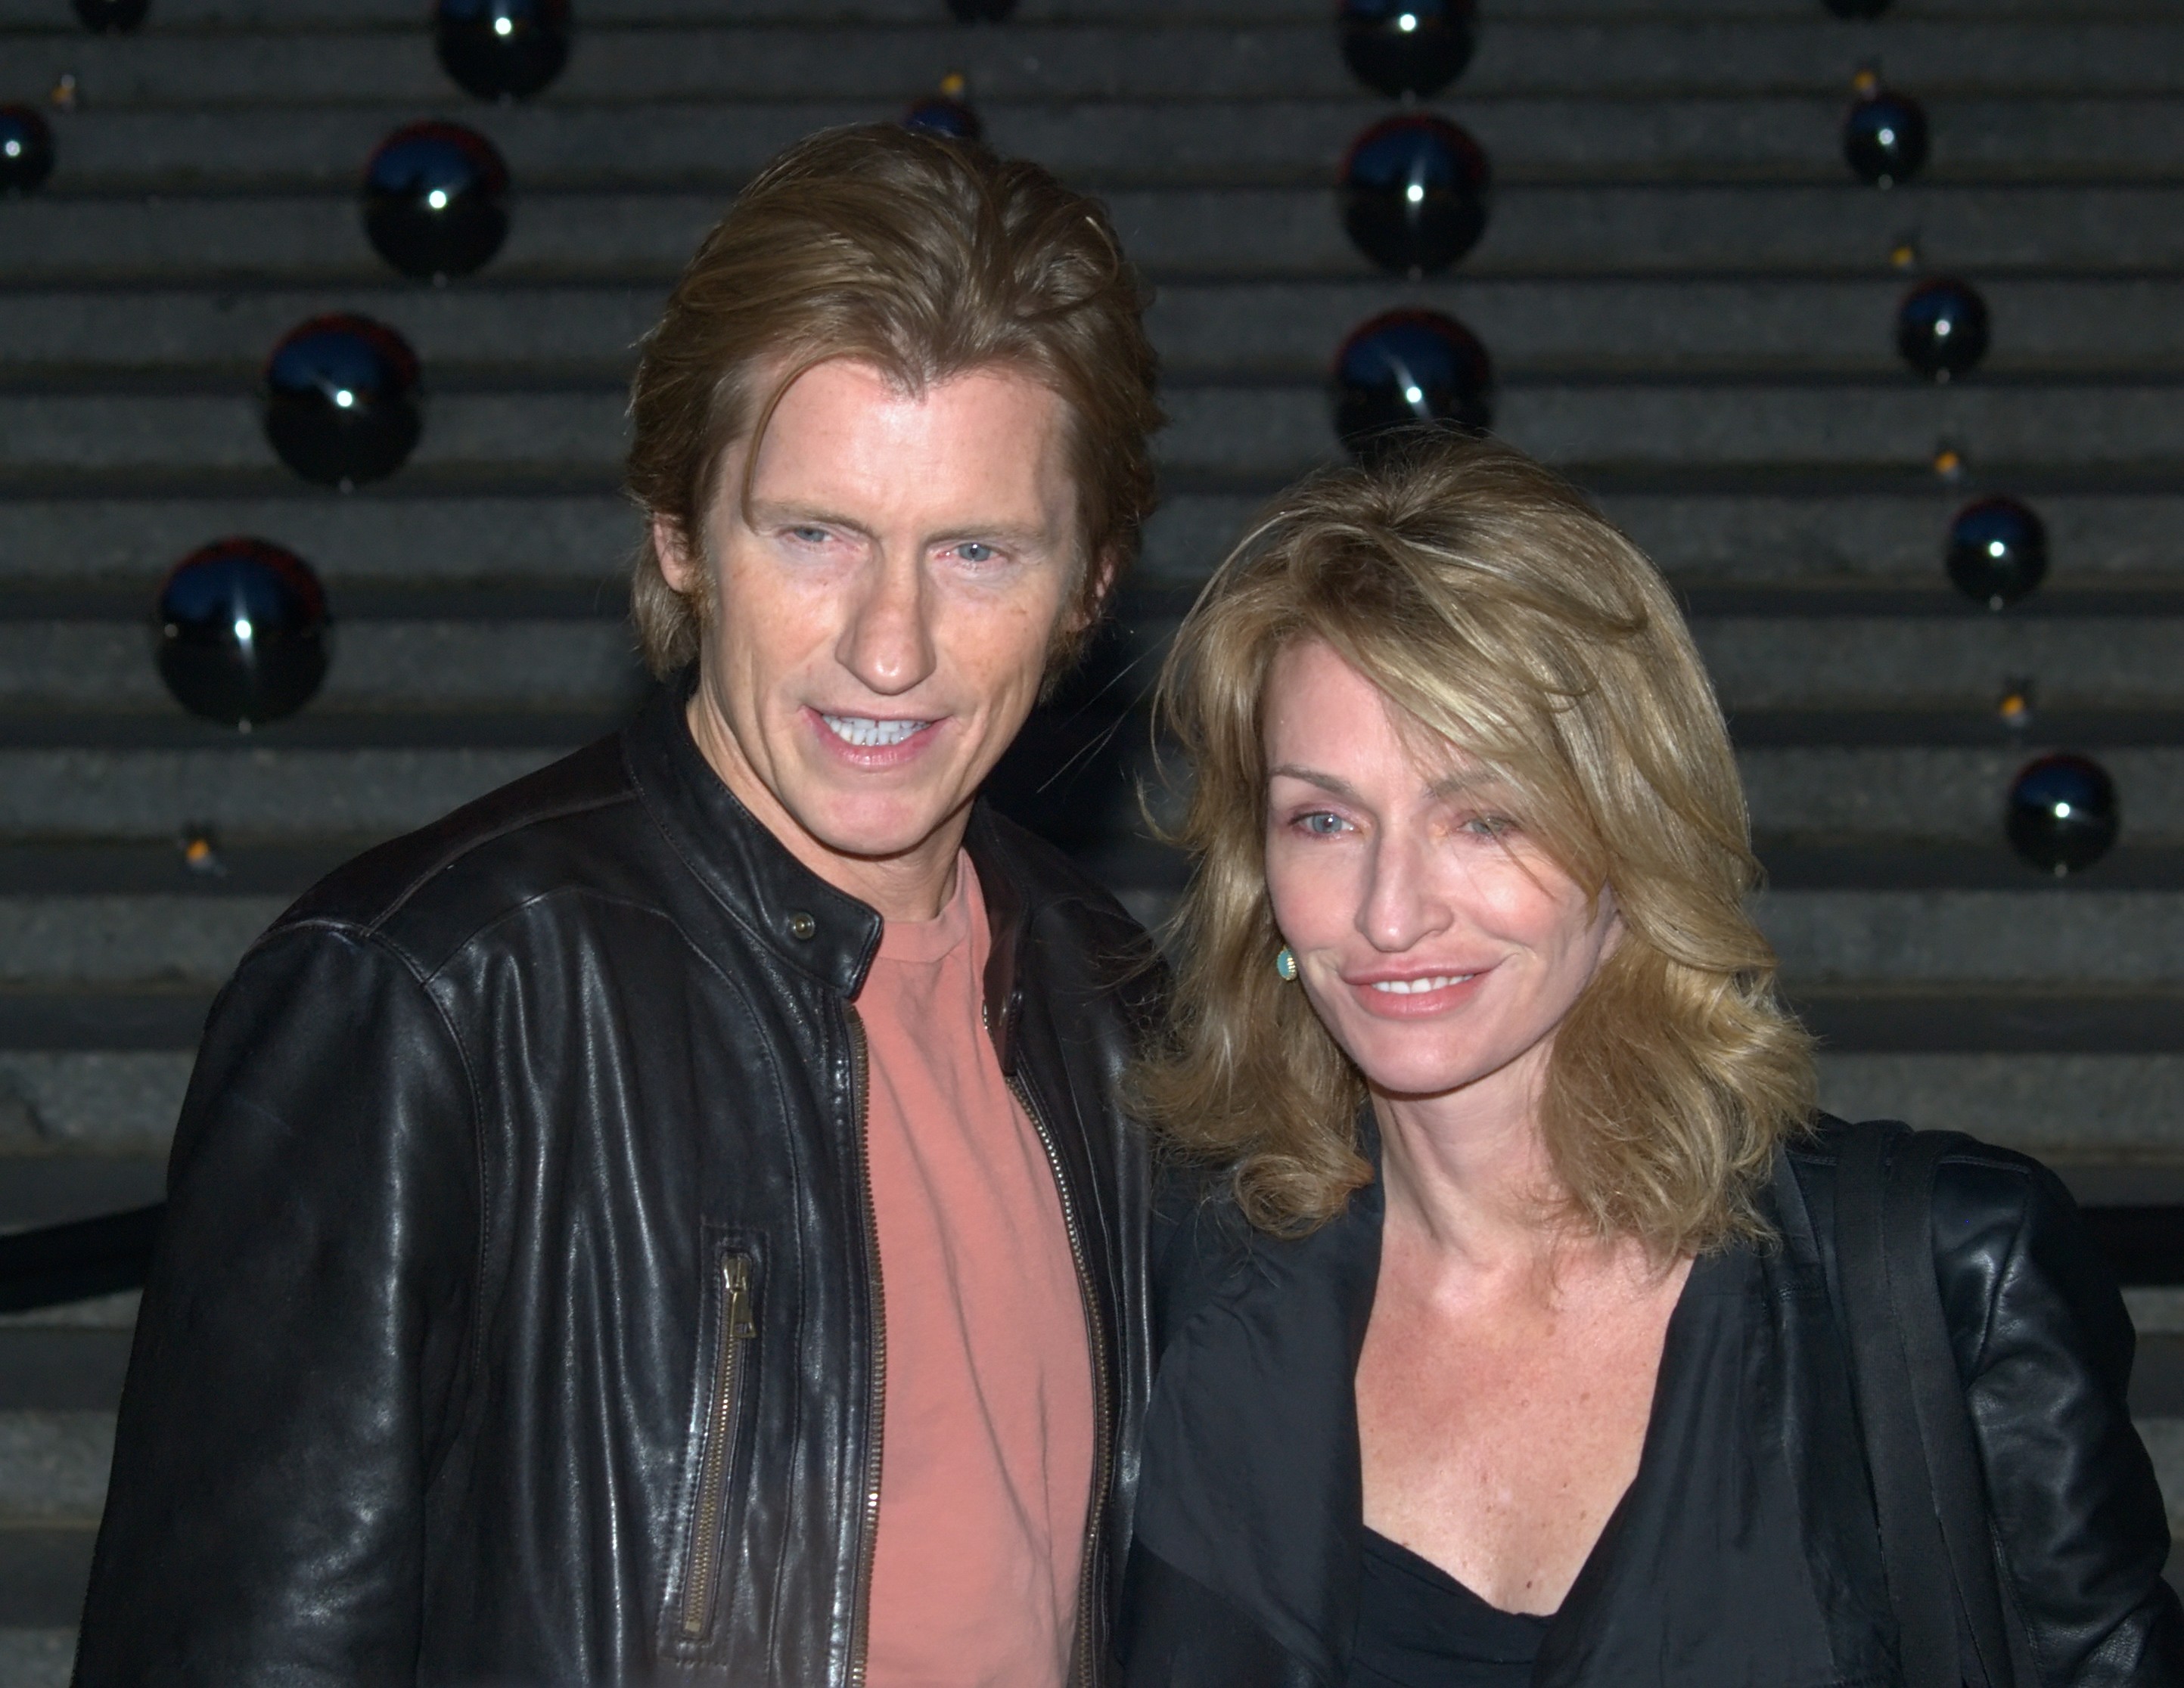 Denis Leary Wallpaper High Quality